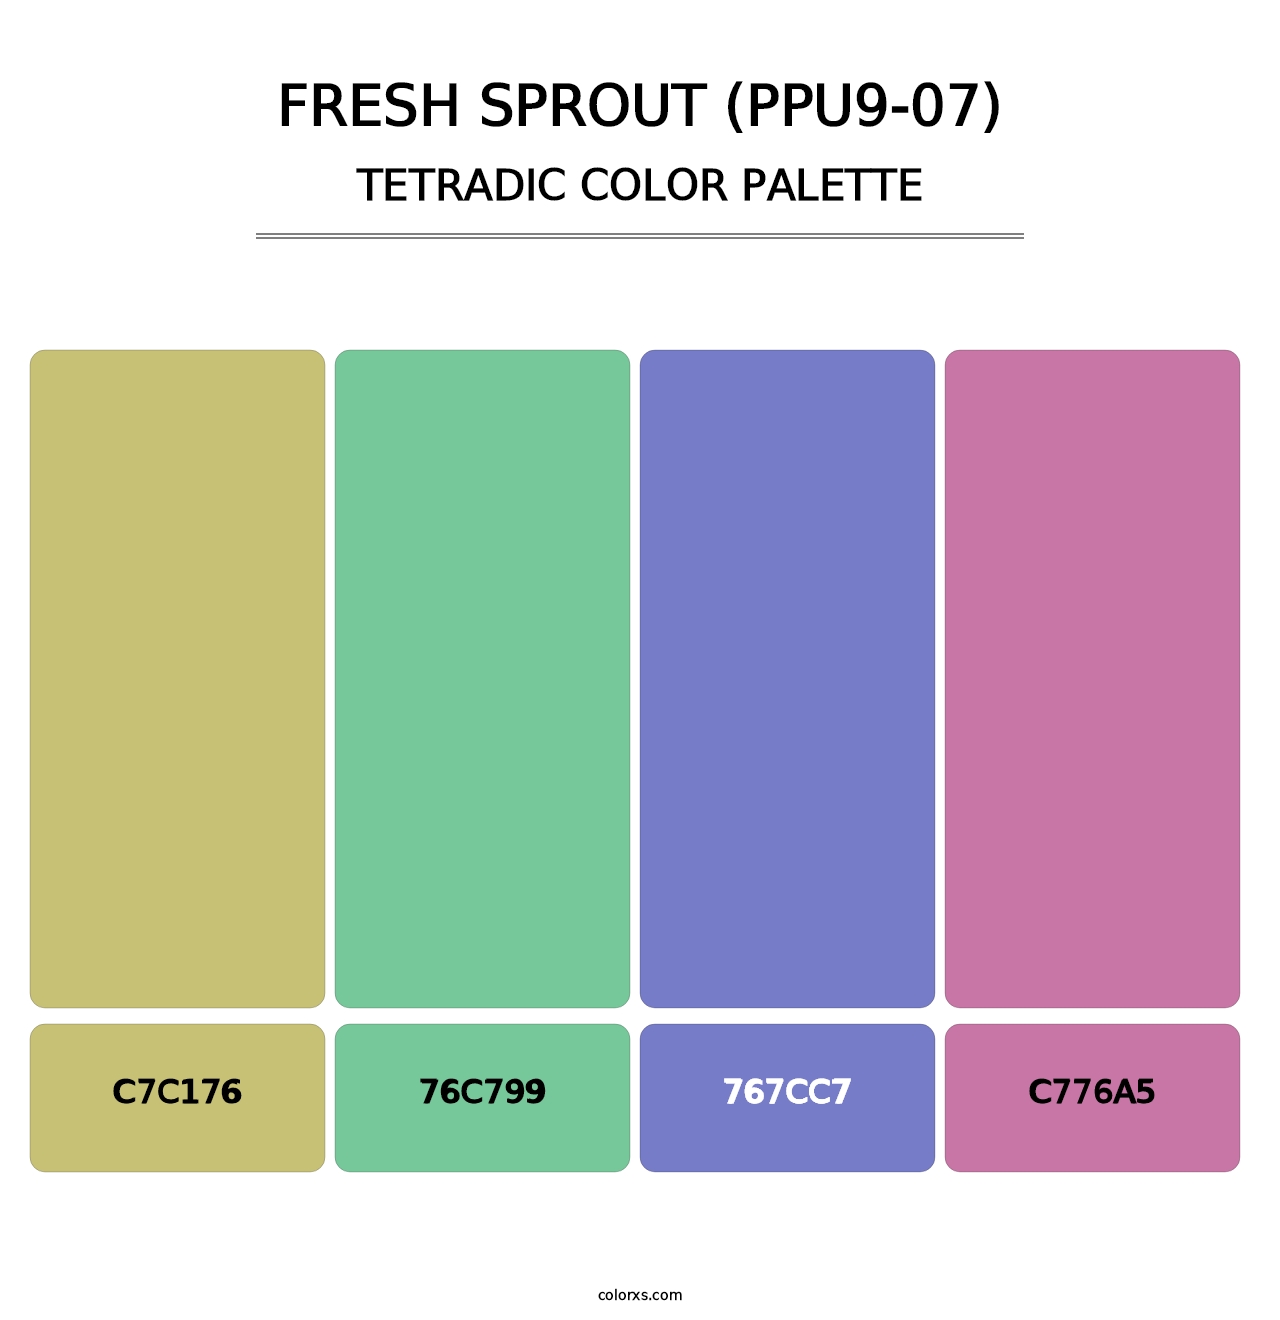 Fresh Sprout (PPU9-07) - Tetradic Color Palette